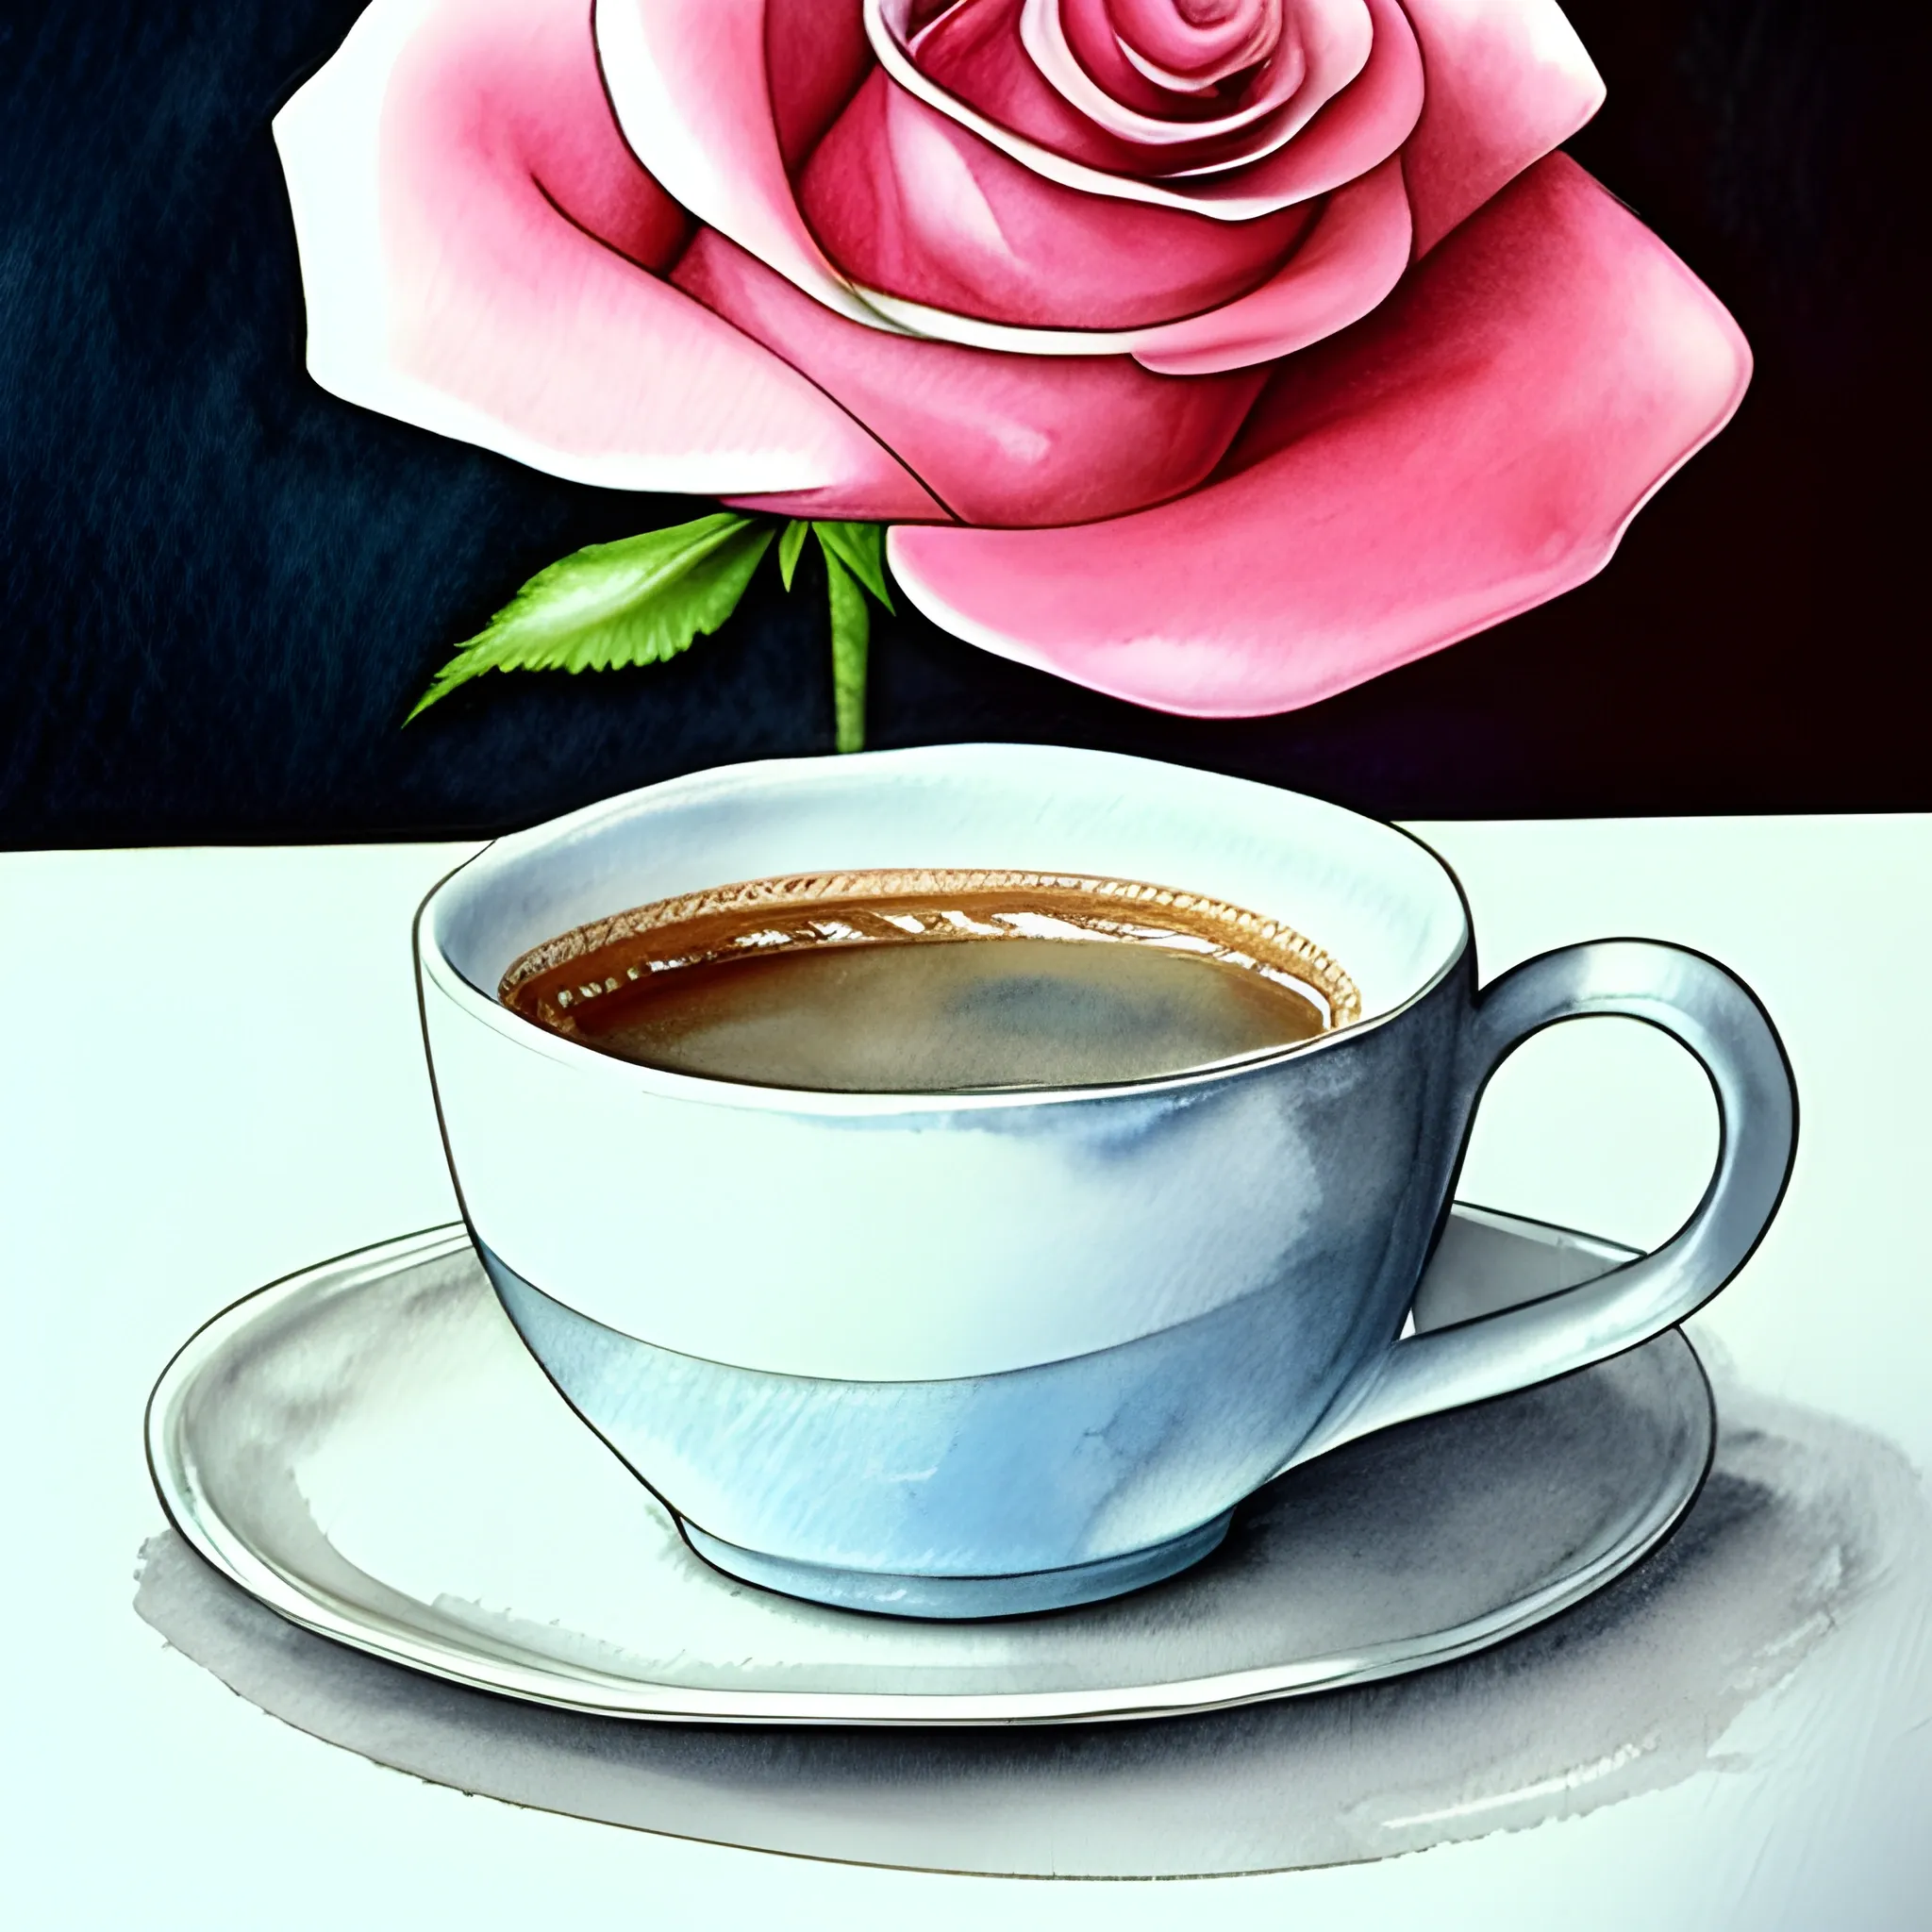 Water Color, Draw a coffee cup on a table, with a rose delicately placed inside it